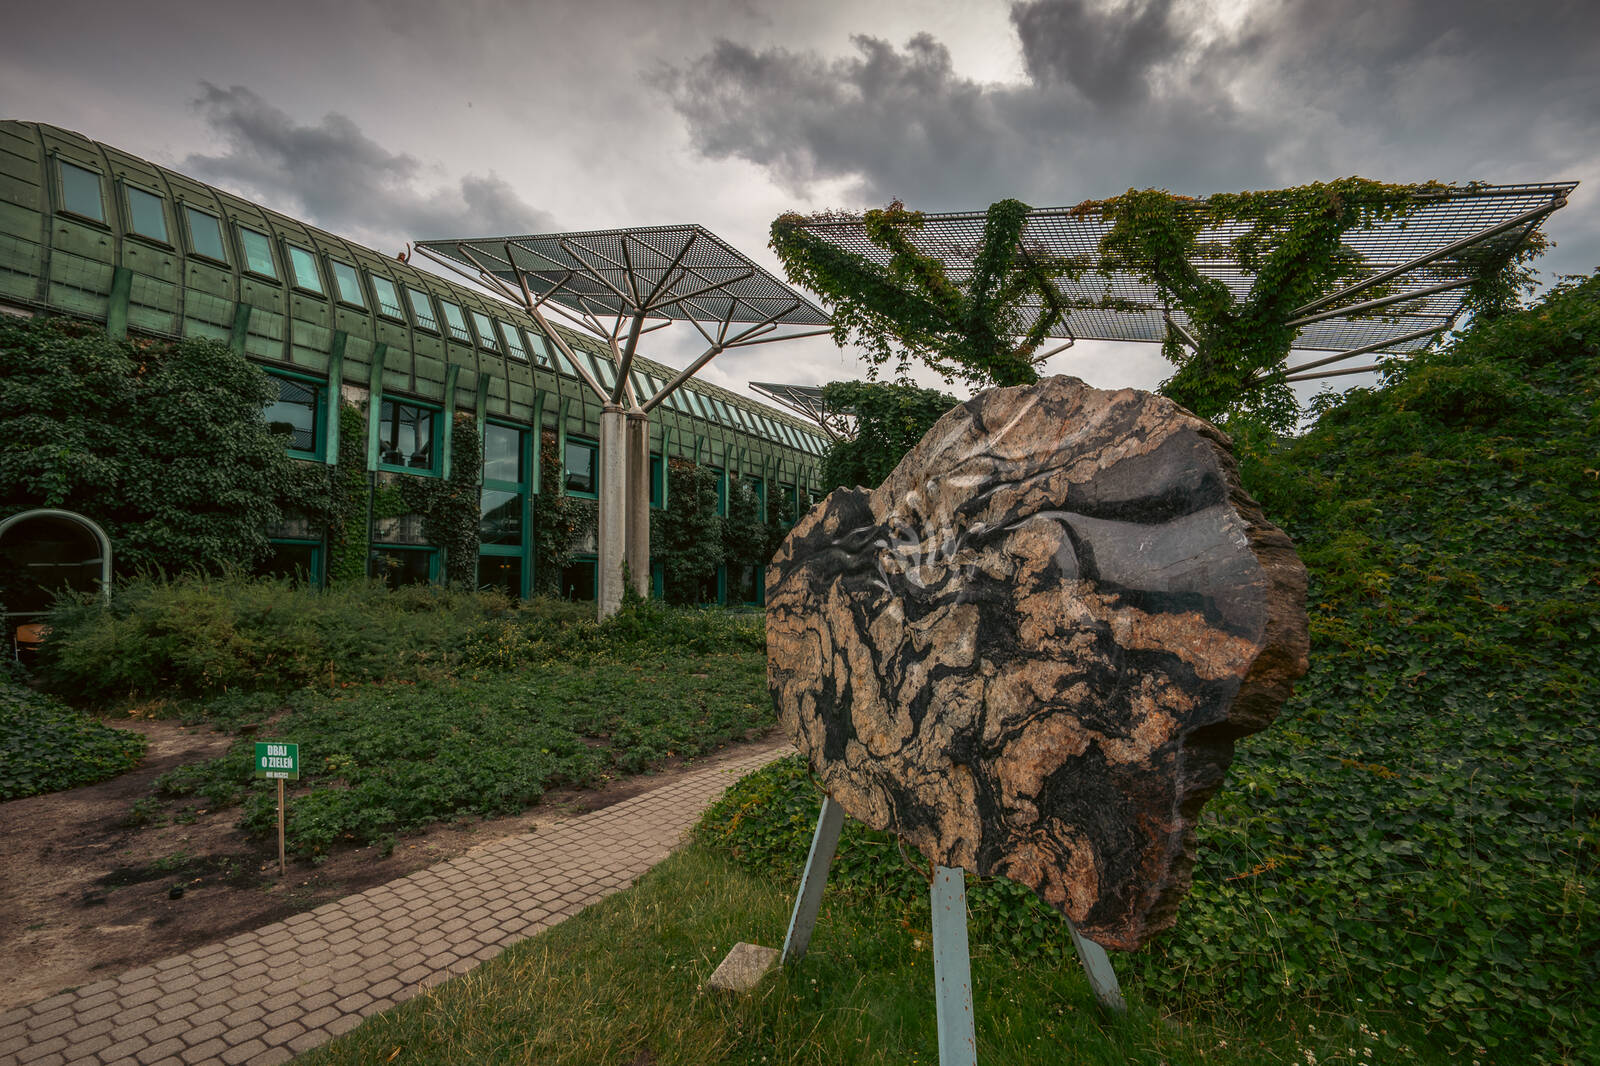 Image of Warsaw University Library Roof Garden by James Billings.